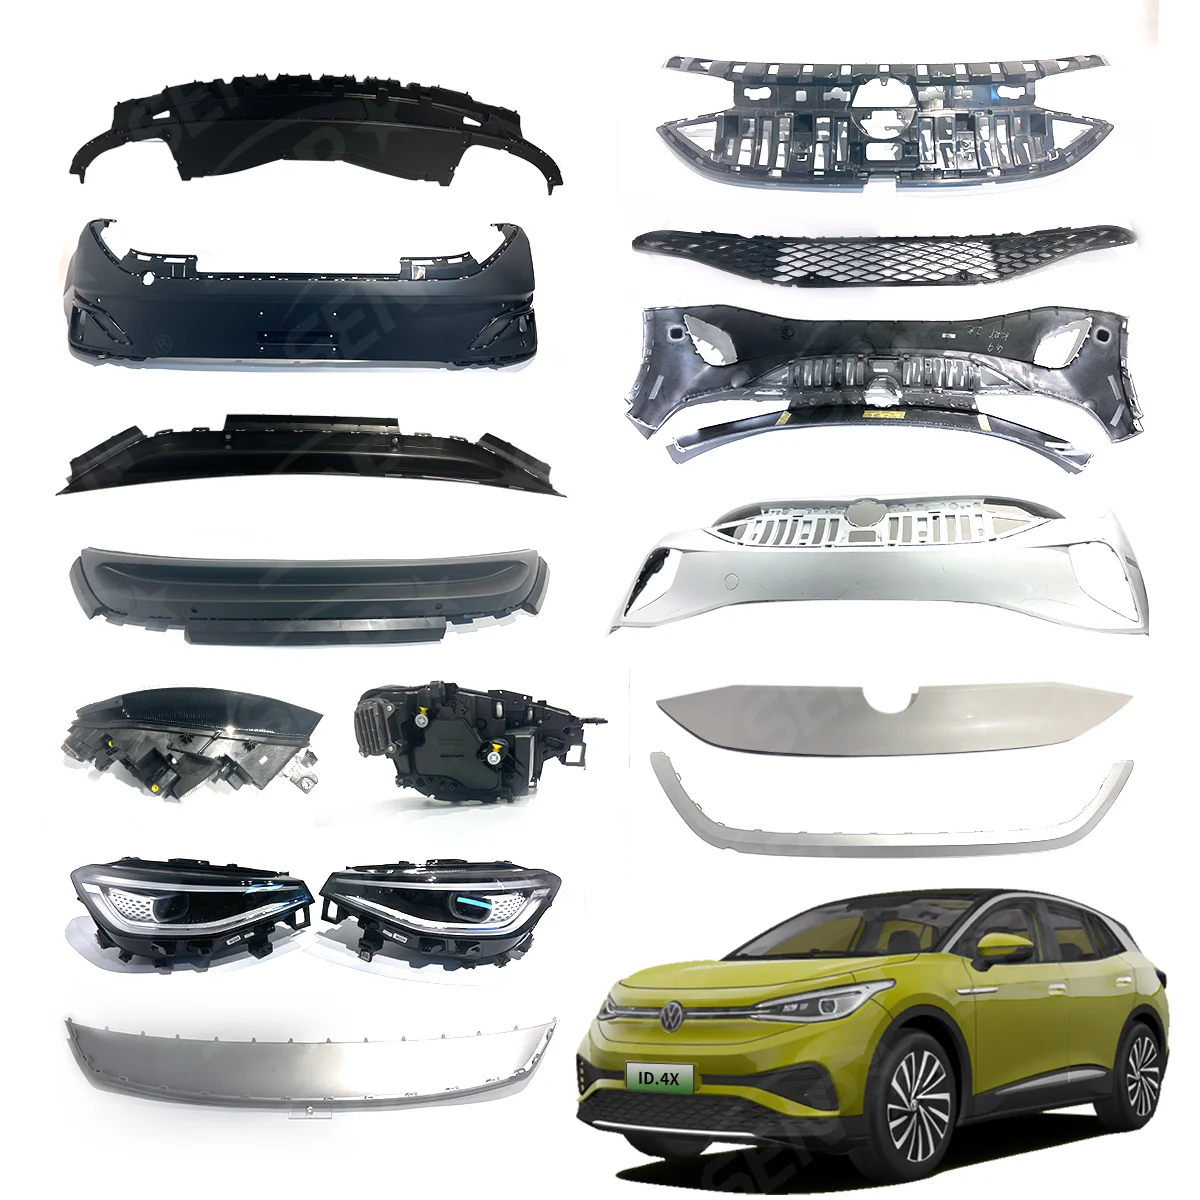 High Quality Car Parts Suitable for VW Electric Vehicles;ID4,ID5,ID6,Electric Car Auto Parts